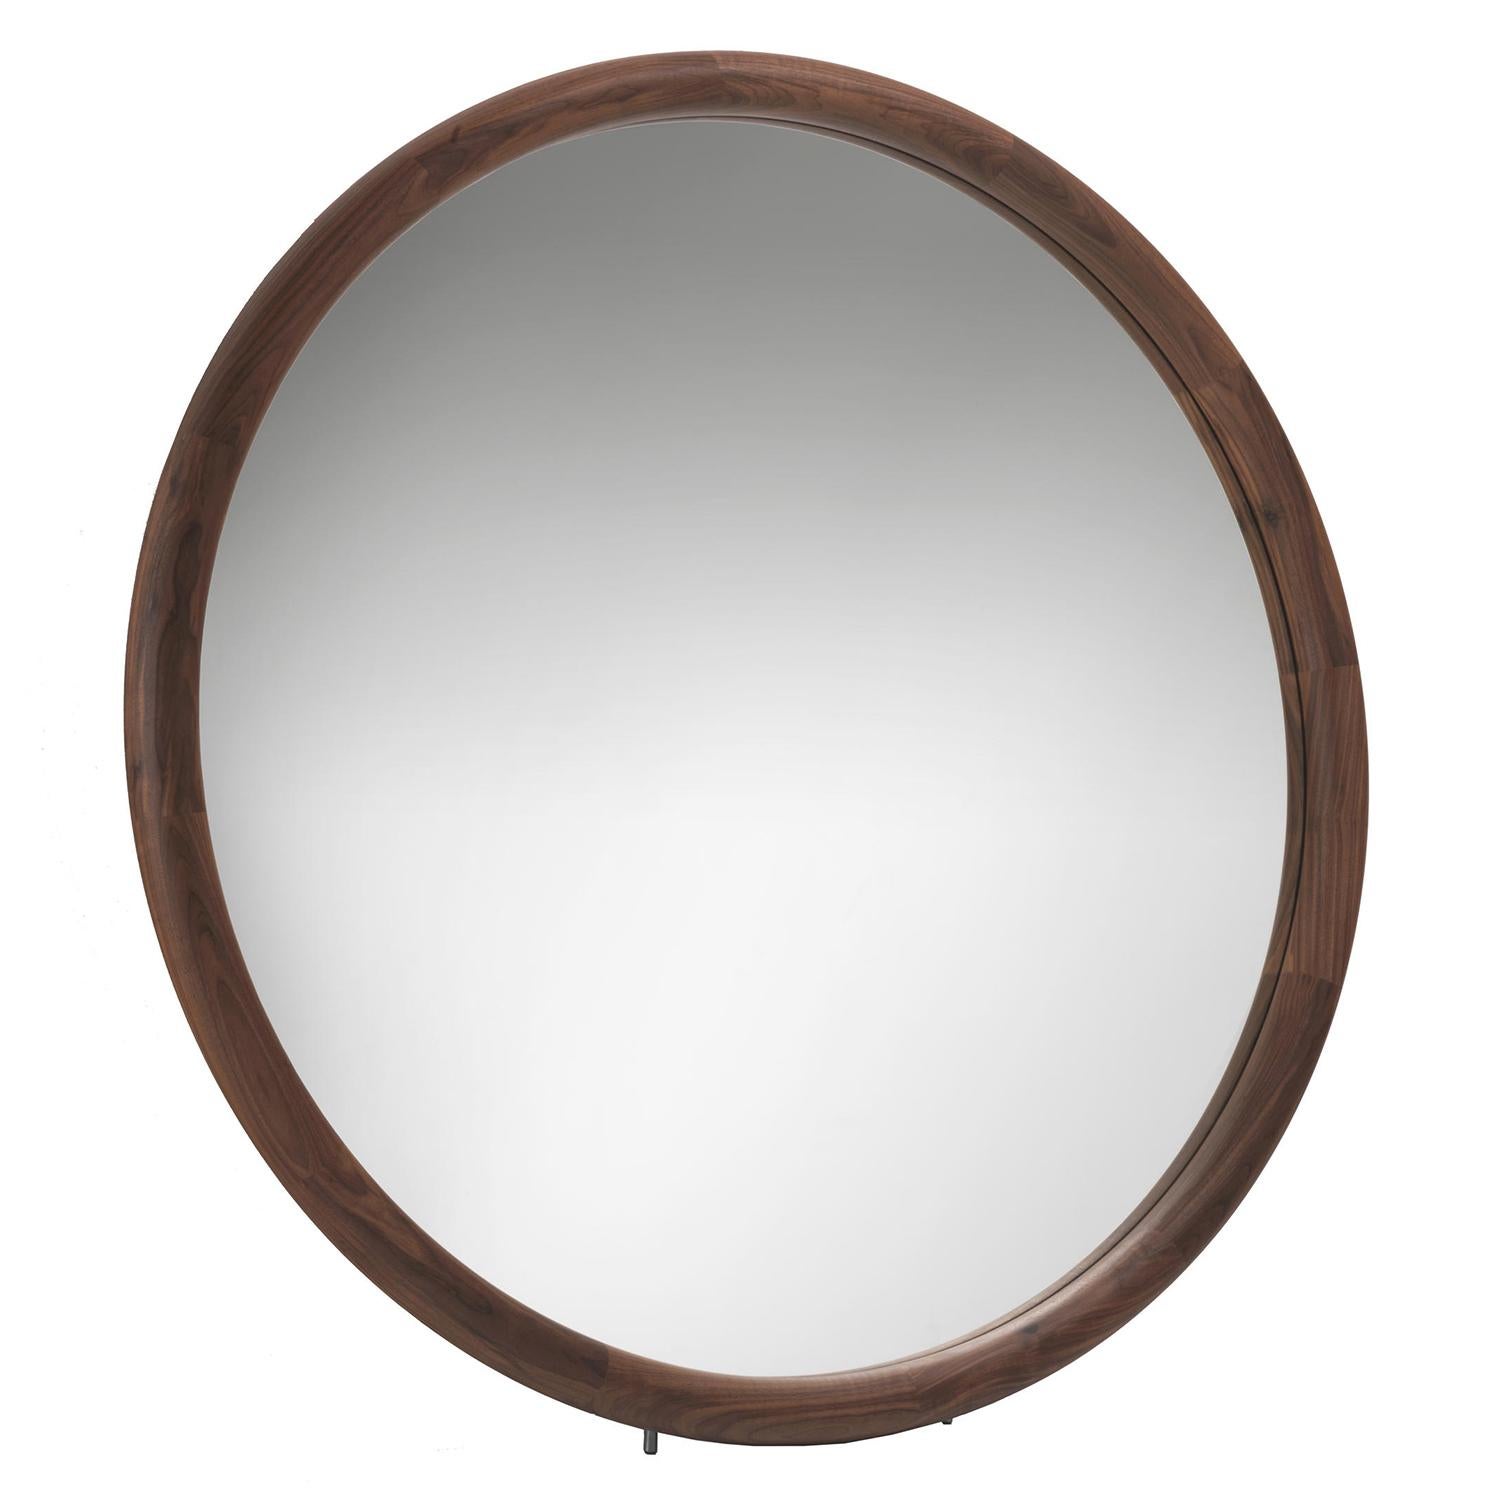 Mirror circle walnut with solid walnut frame and
with round flat mirror glass, mirror to be hung as
a wall mirror or to be leant as floor mirror. It is only
advise toremoving the feet support to hang the 
mirror to the wall.